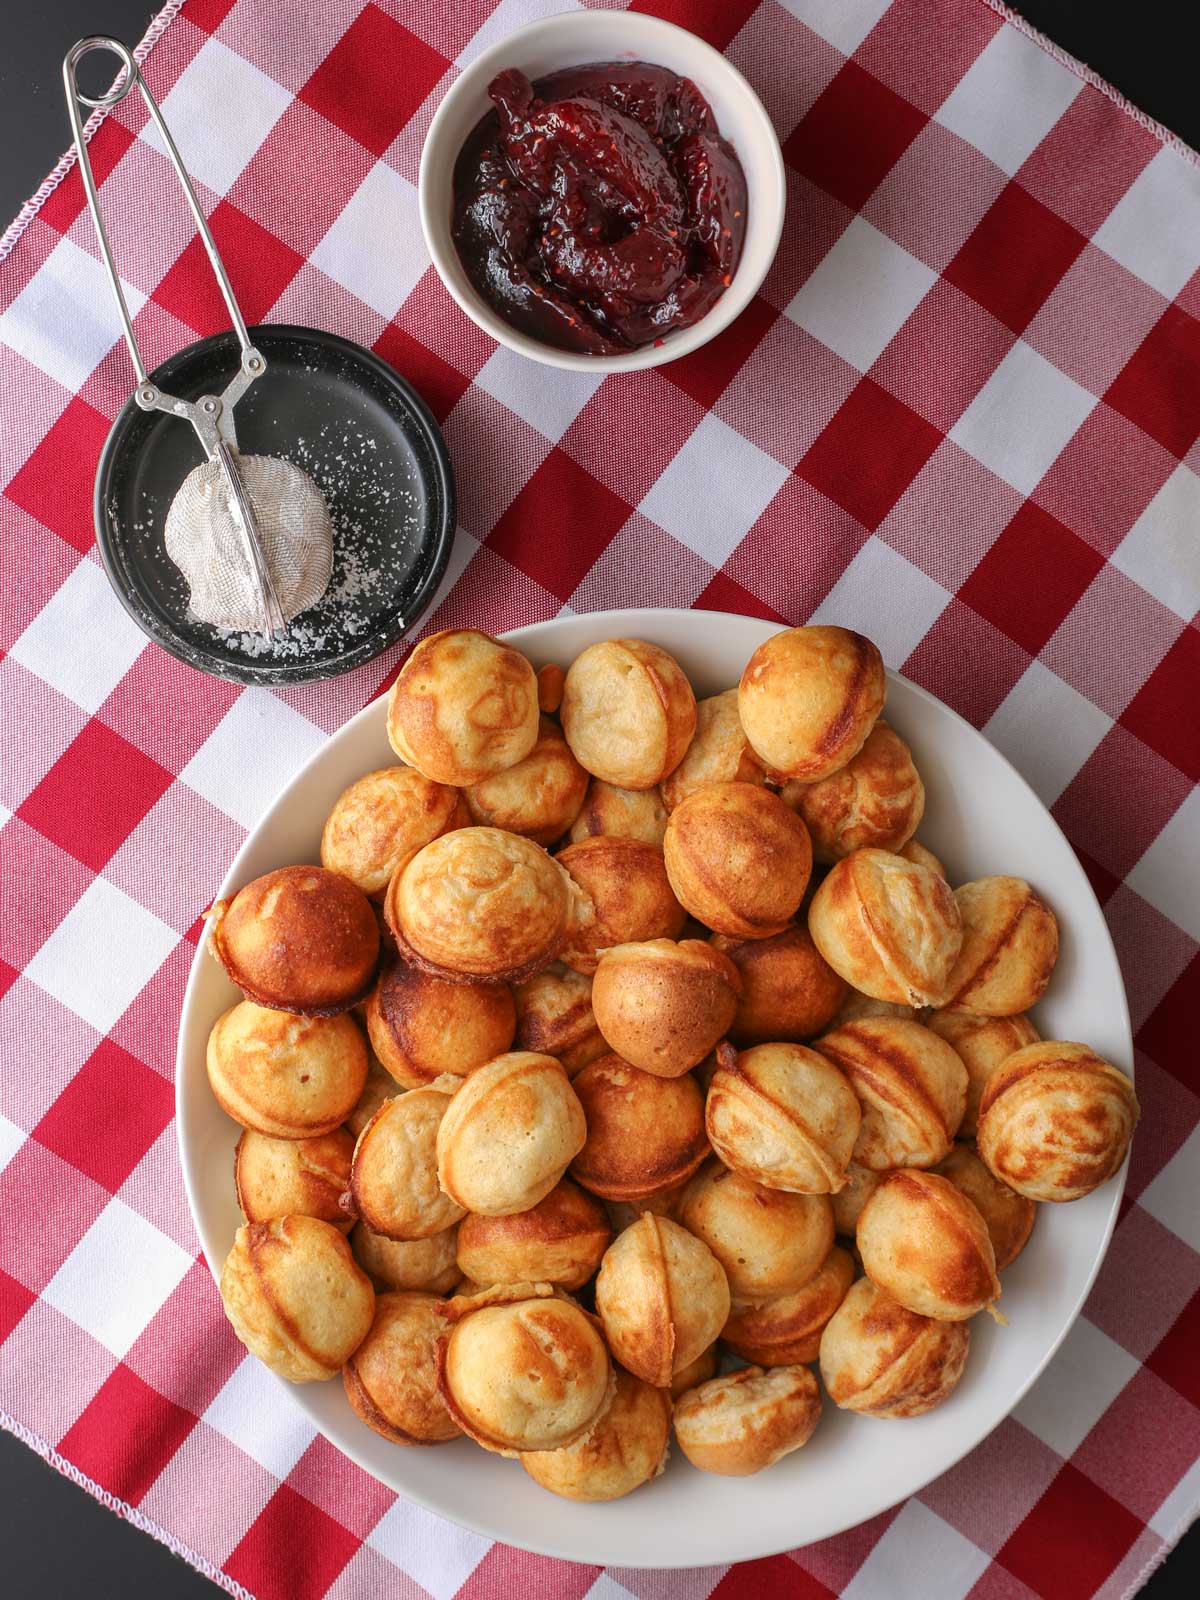 large platter full of aebleskiver with toppings in dishes nearby on checked cloth table.